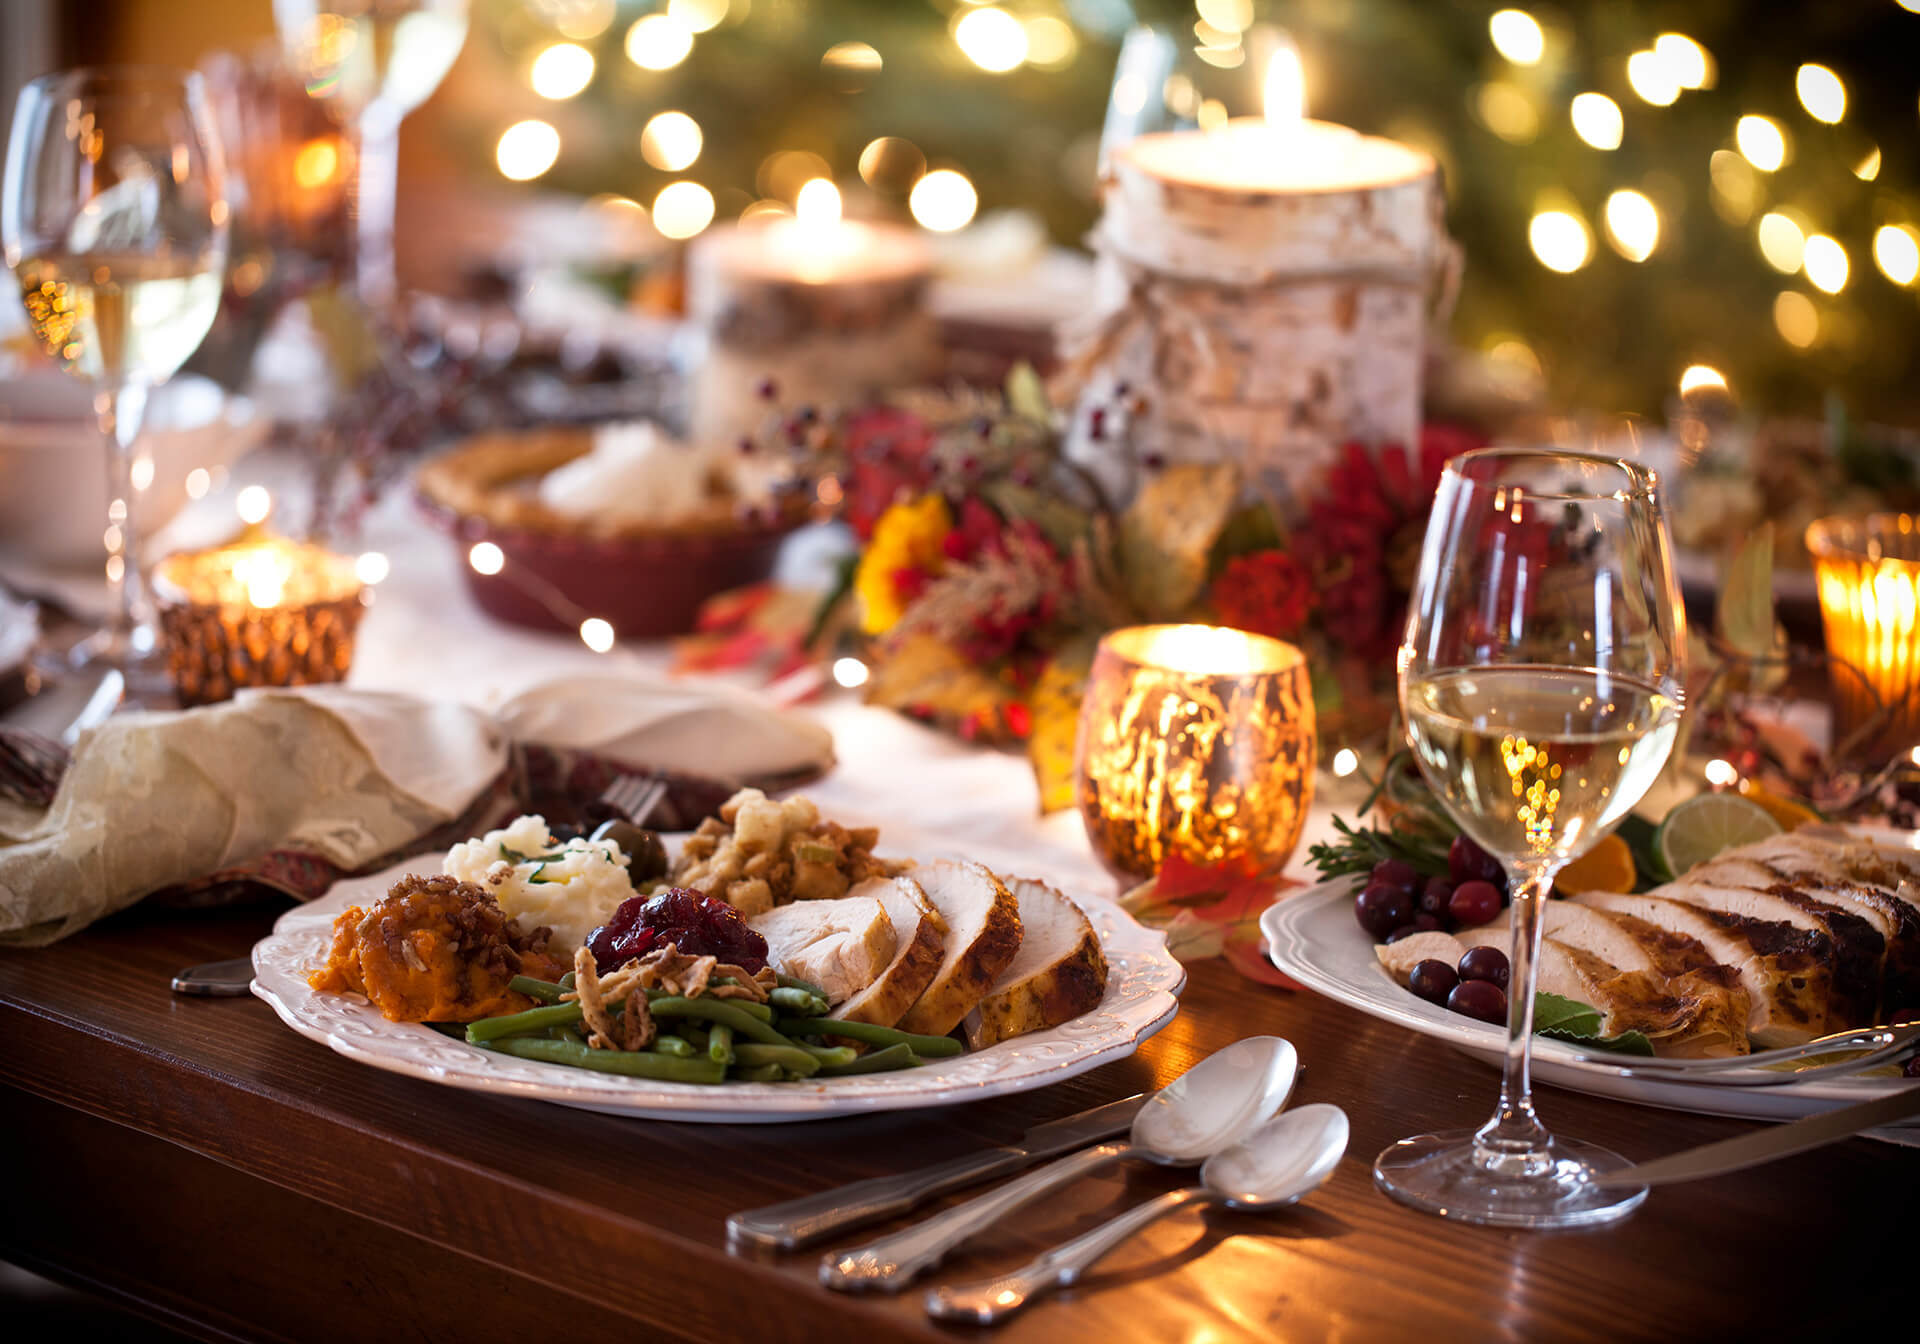 Holiday Catering The Best Tips for Food to Match the Holidays · Merri